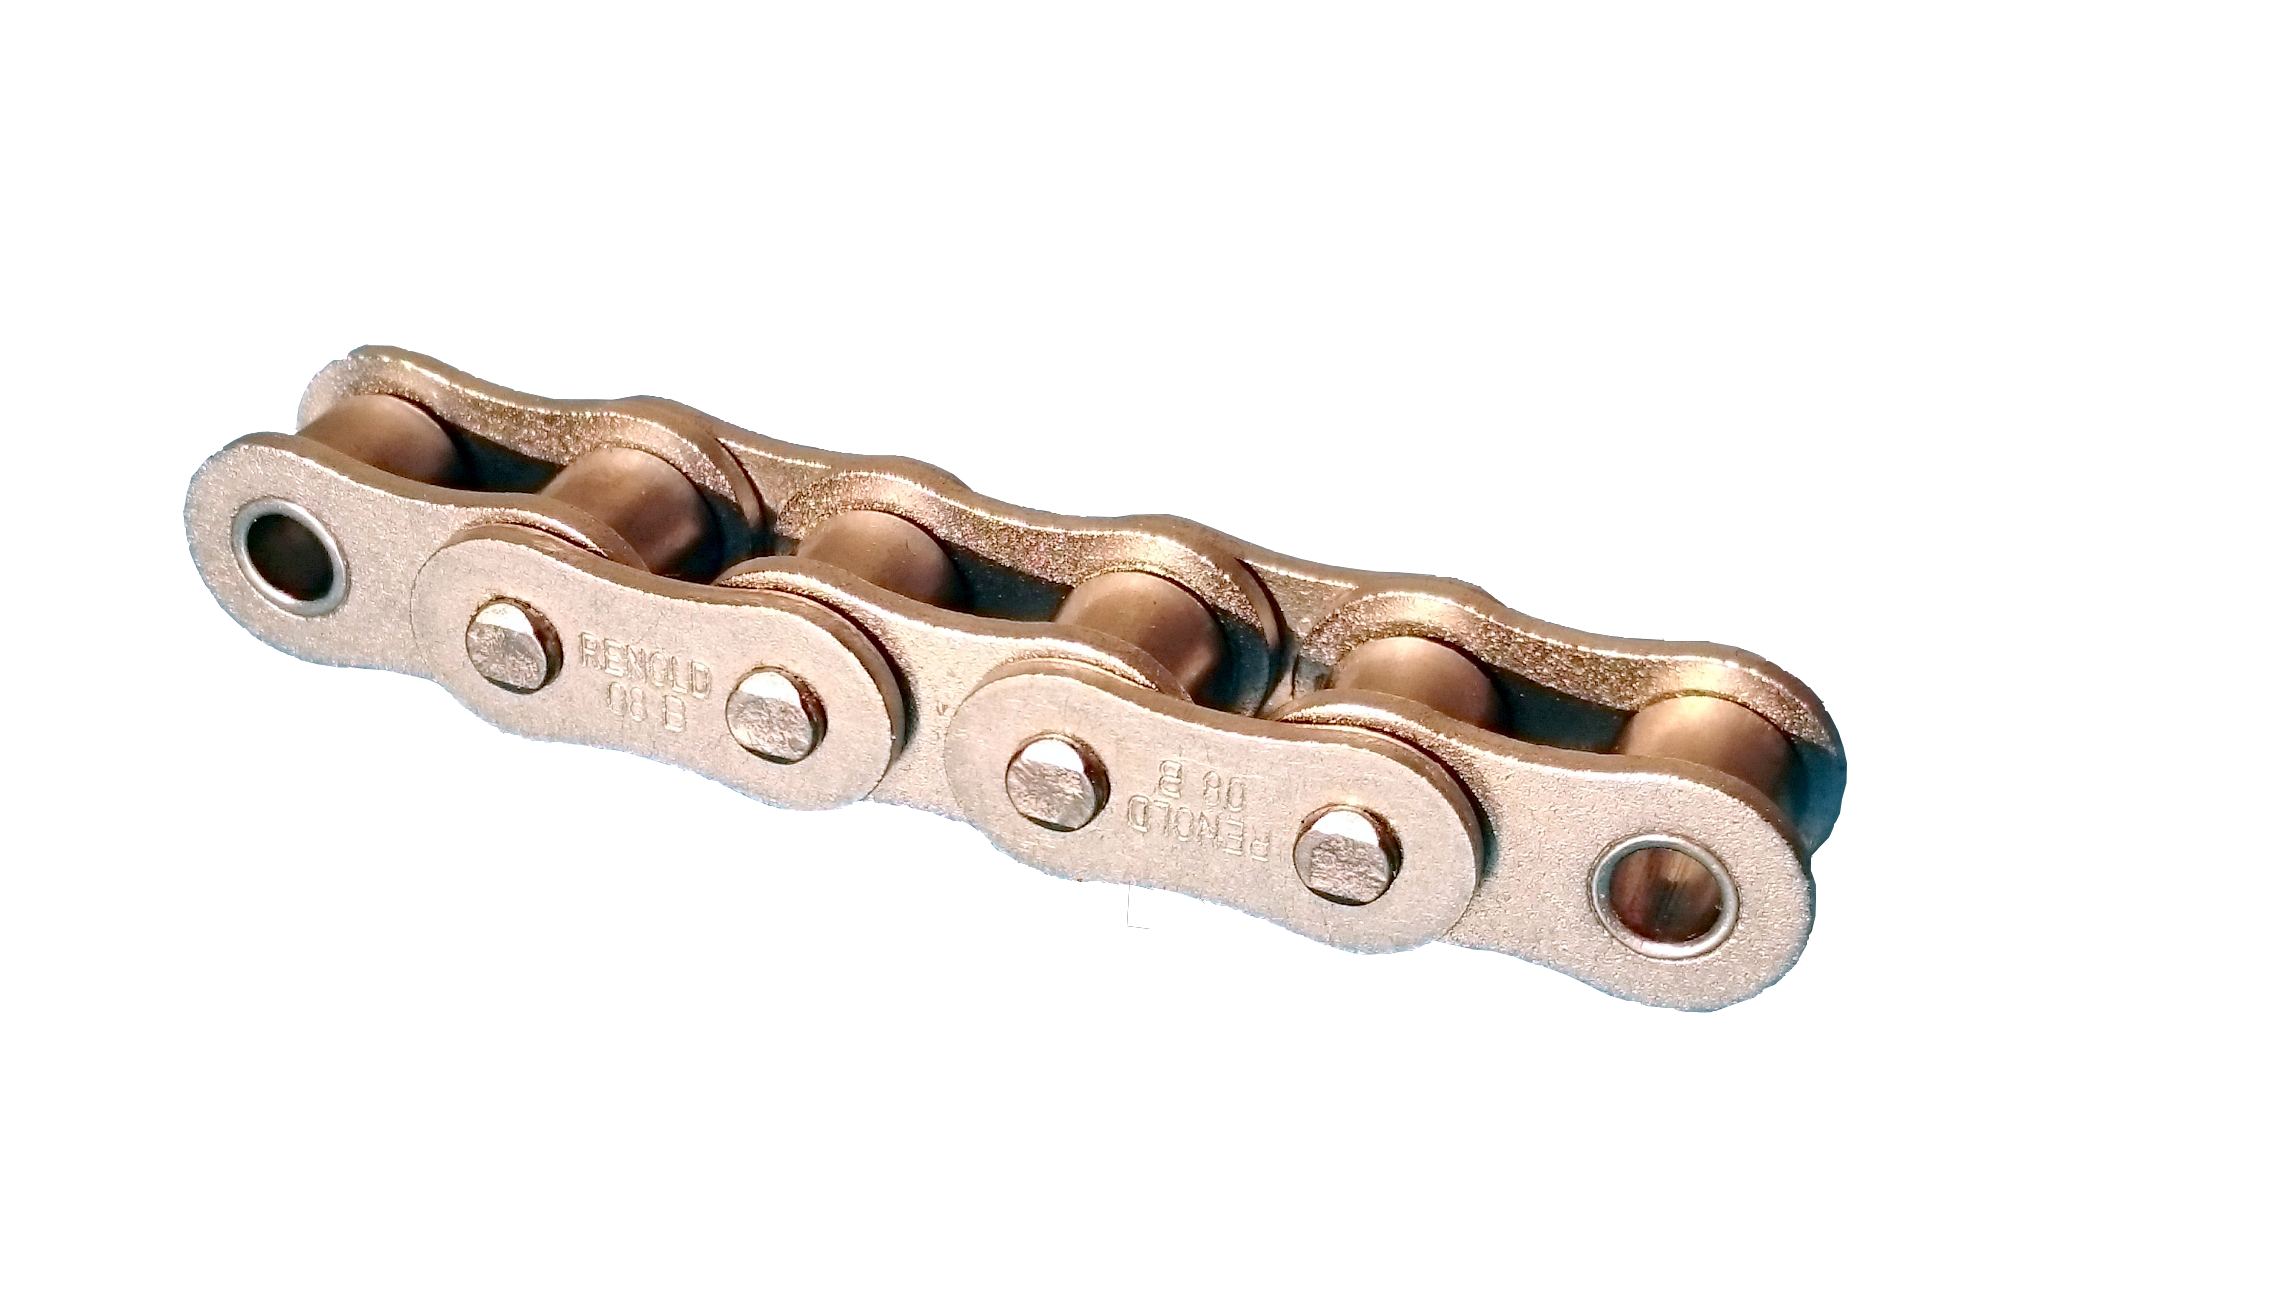 nickel plated chains